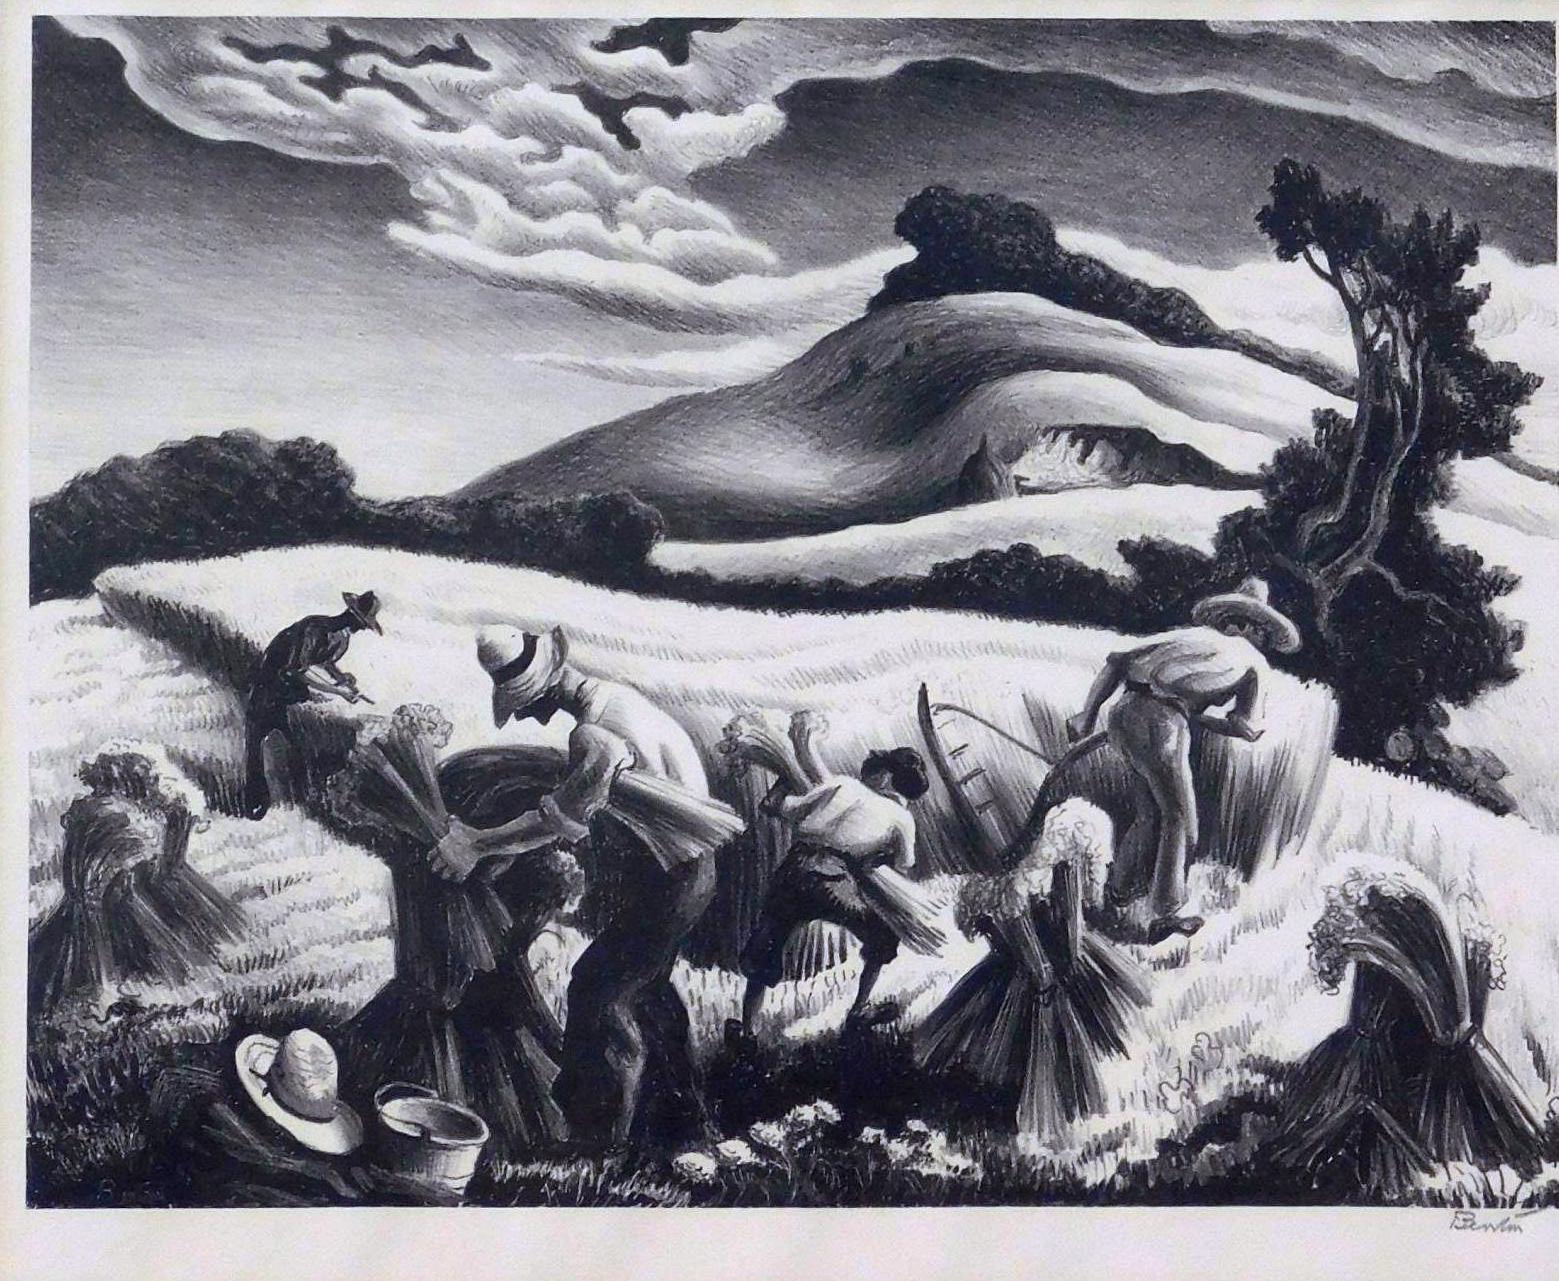 Original stone lithograph created 1939 by well-known Regionalist Thomas Hart Benton.
The print is in excellent condition and pencil signed lower right.
It is matted in a 4-ply archival mat and rests in a simple black frame.
Image size: 9 ½ x 12.